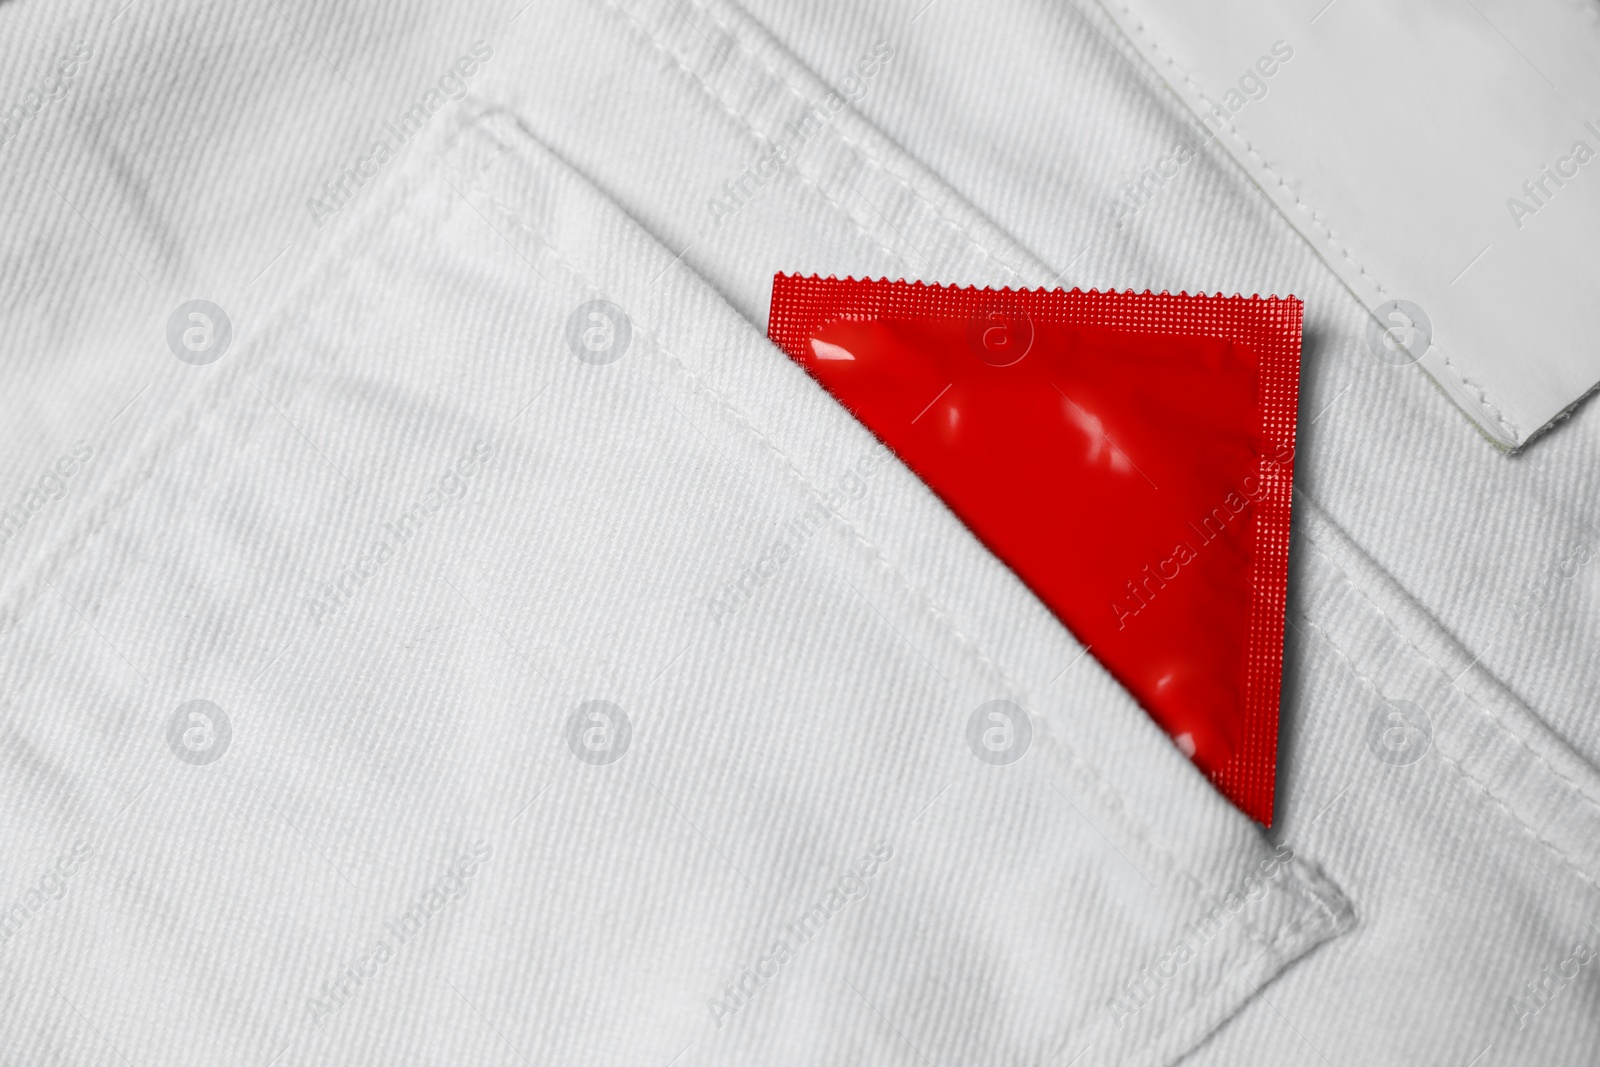 Photo of Packaged condom in white jeans pocket, closeup. Safe sex